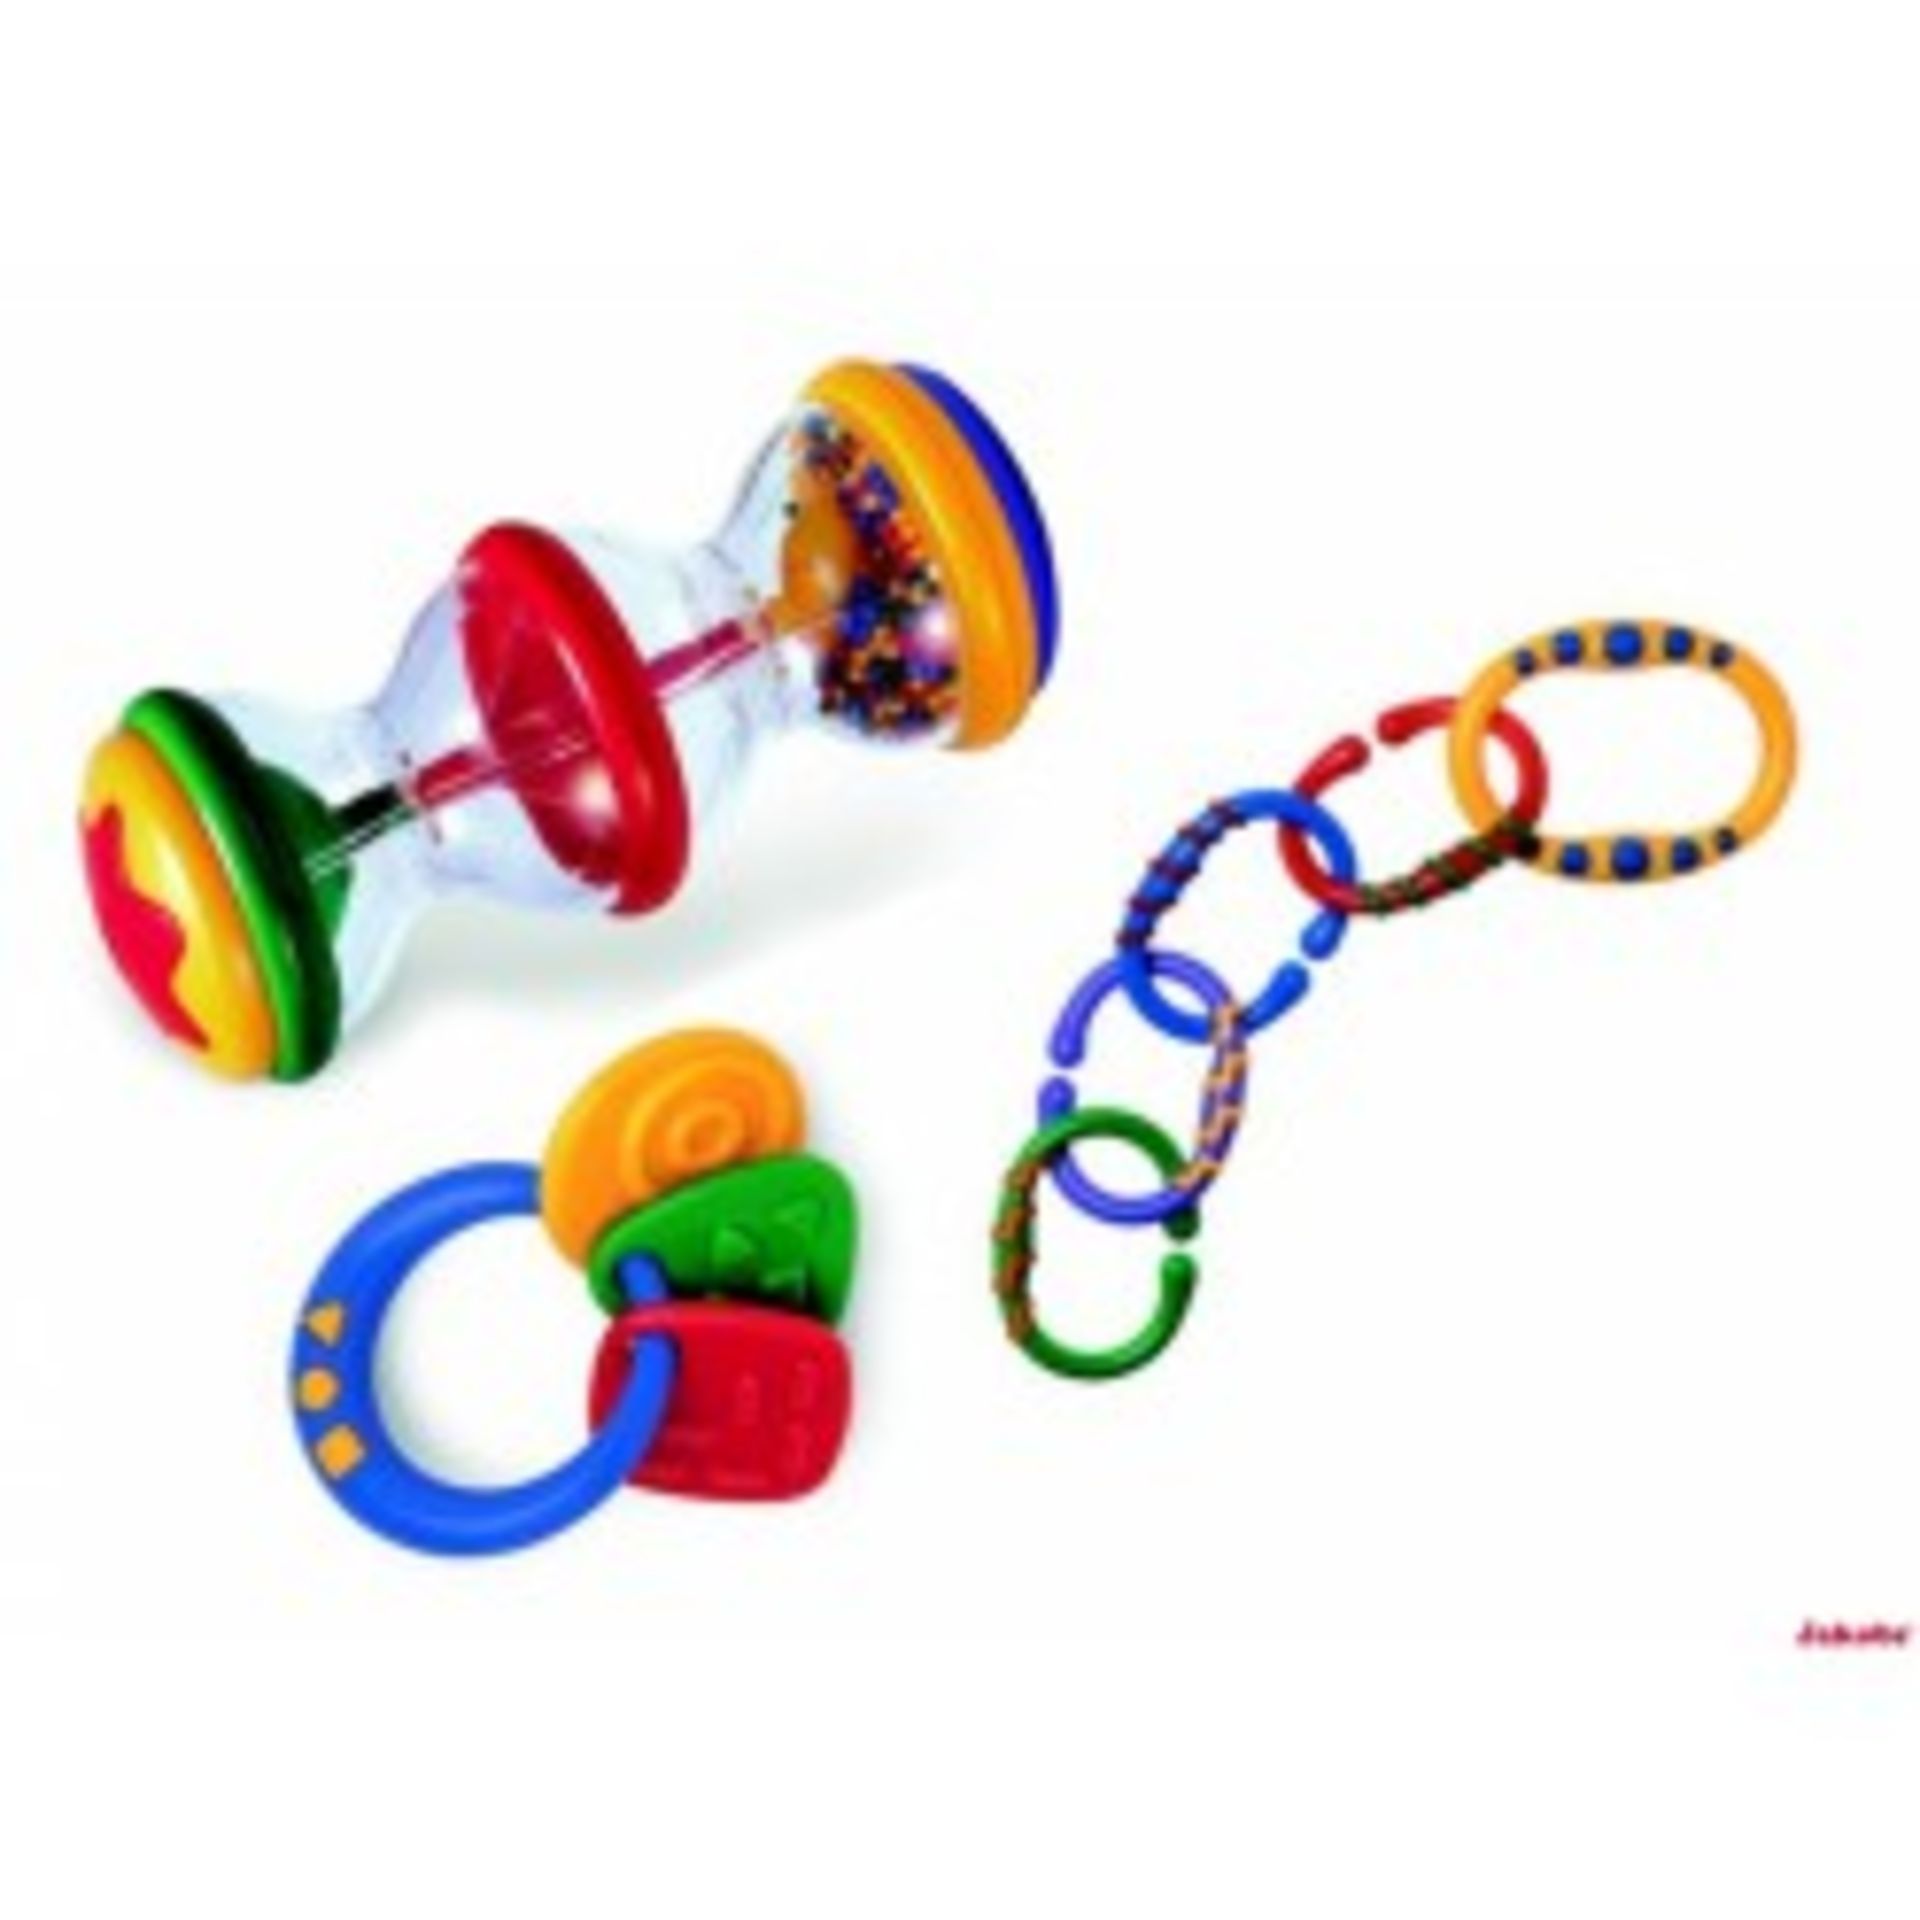 V Brand New Tolo Activity Set Age 3mths+ X 2 YOUR BID PRICE TO BE MULTIPLIED BY TWO